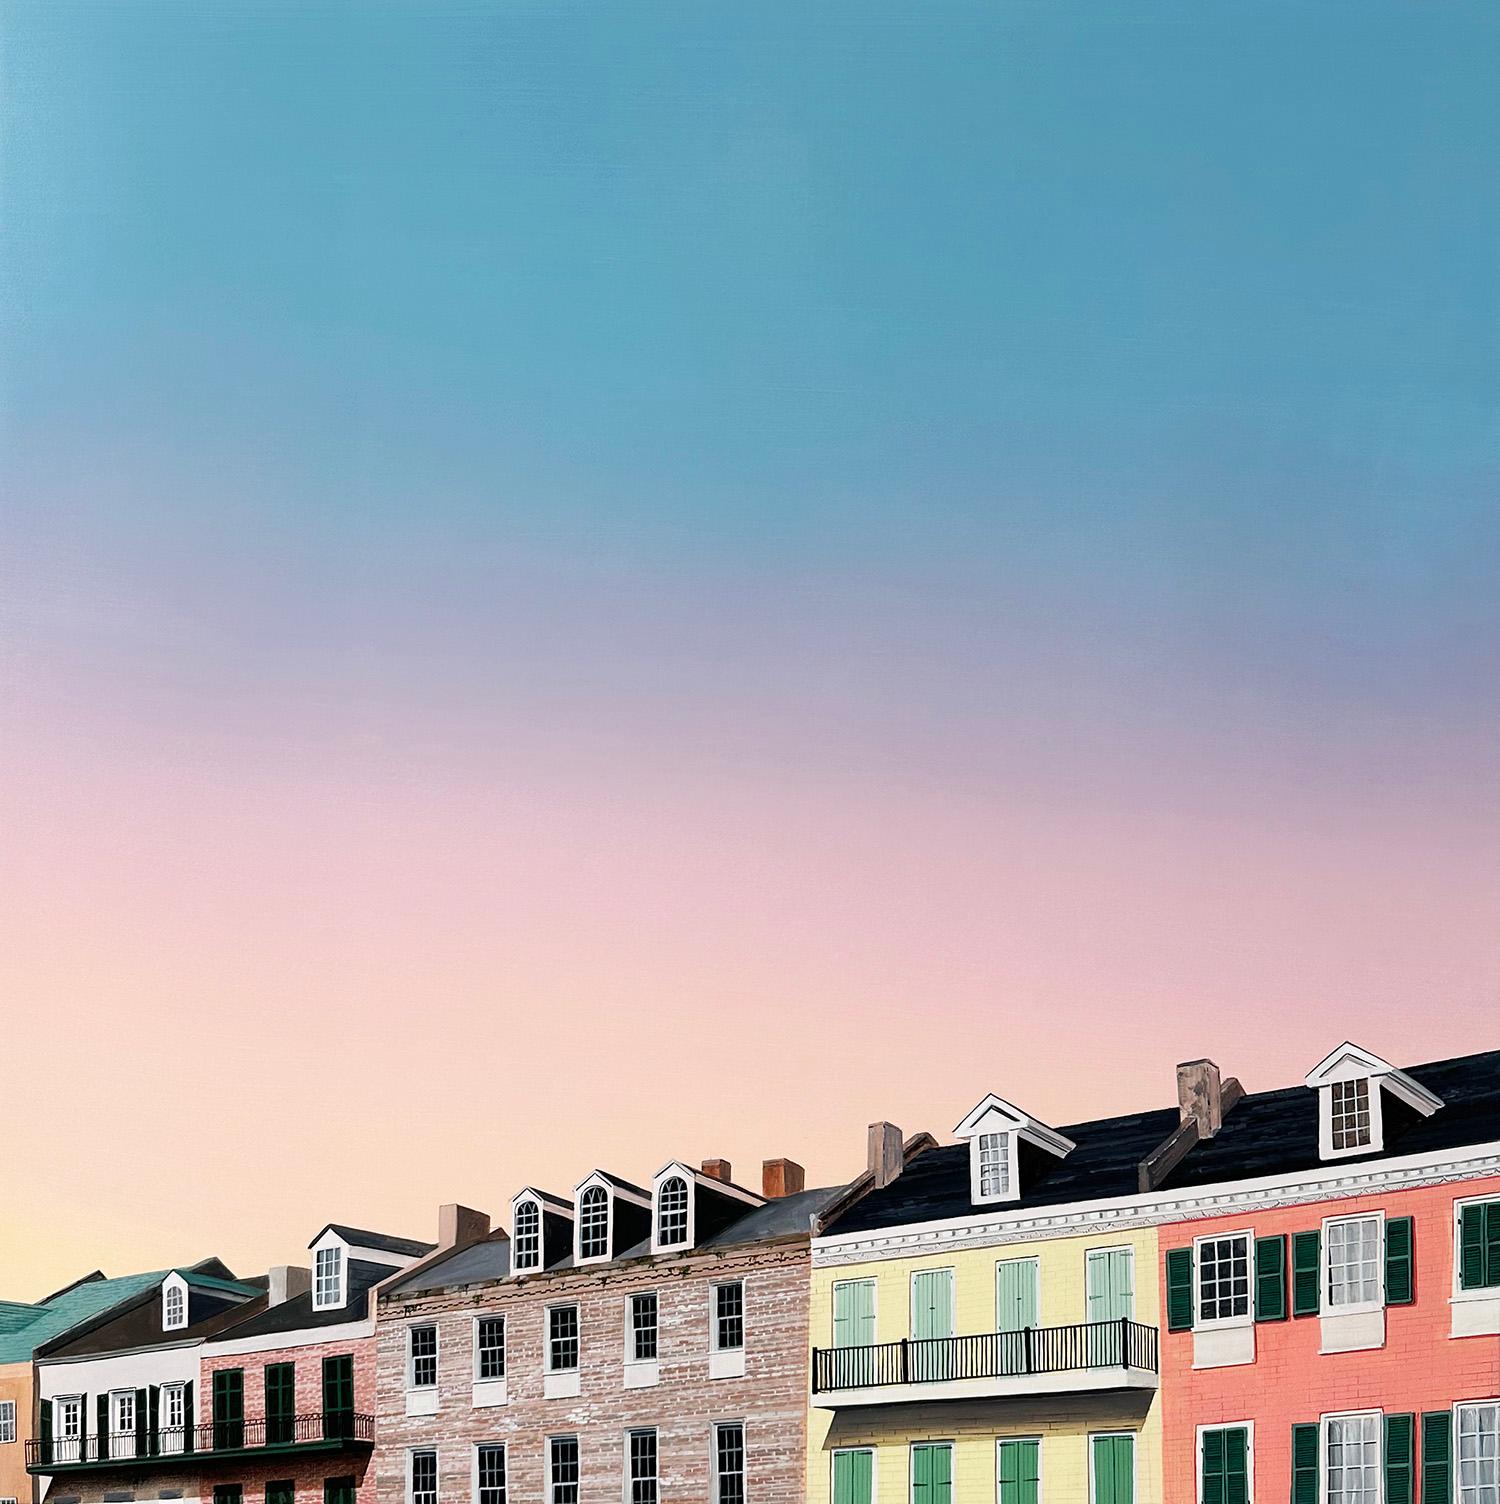 "French Quarter (Decatur St.)", by Kristin Moore, is a part of her 2024 solo exhibition, “Through the Bayou, Into the Garden”, at Ferrara Showman Gallery. Marking a transition from her previous work, "French Quarter (Decatur St.)" shows Kristin